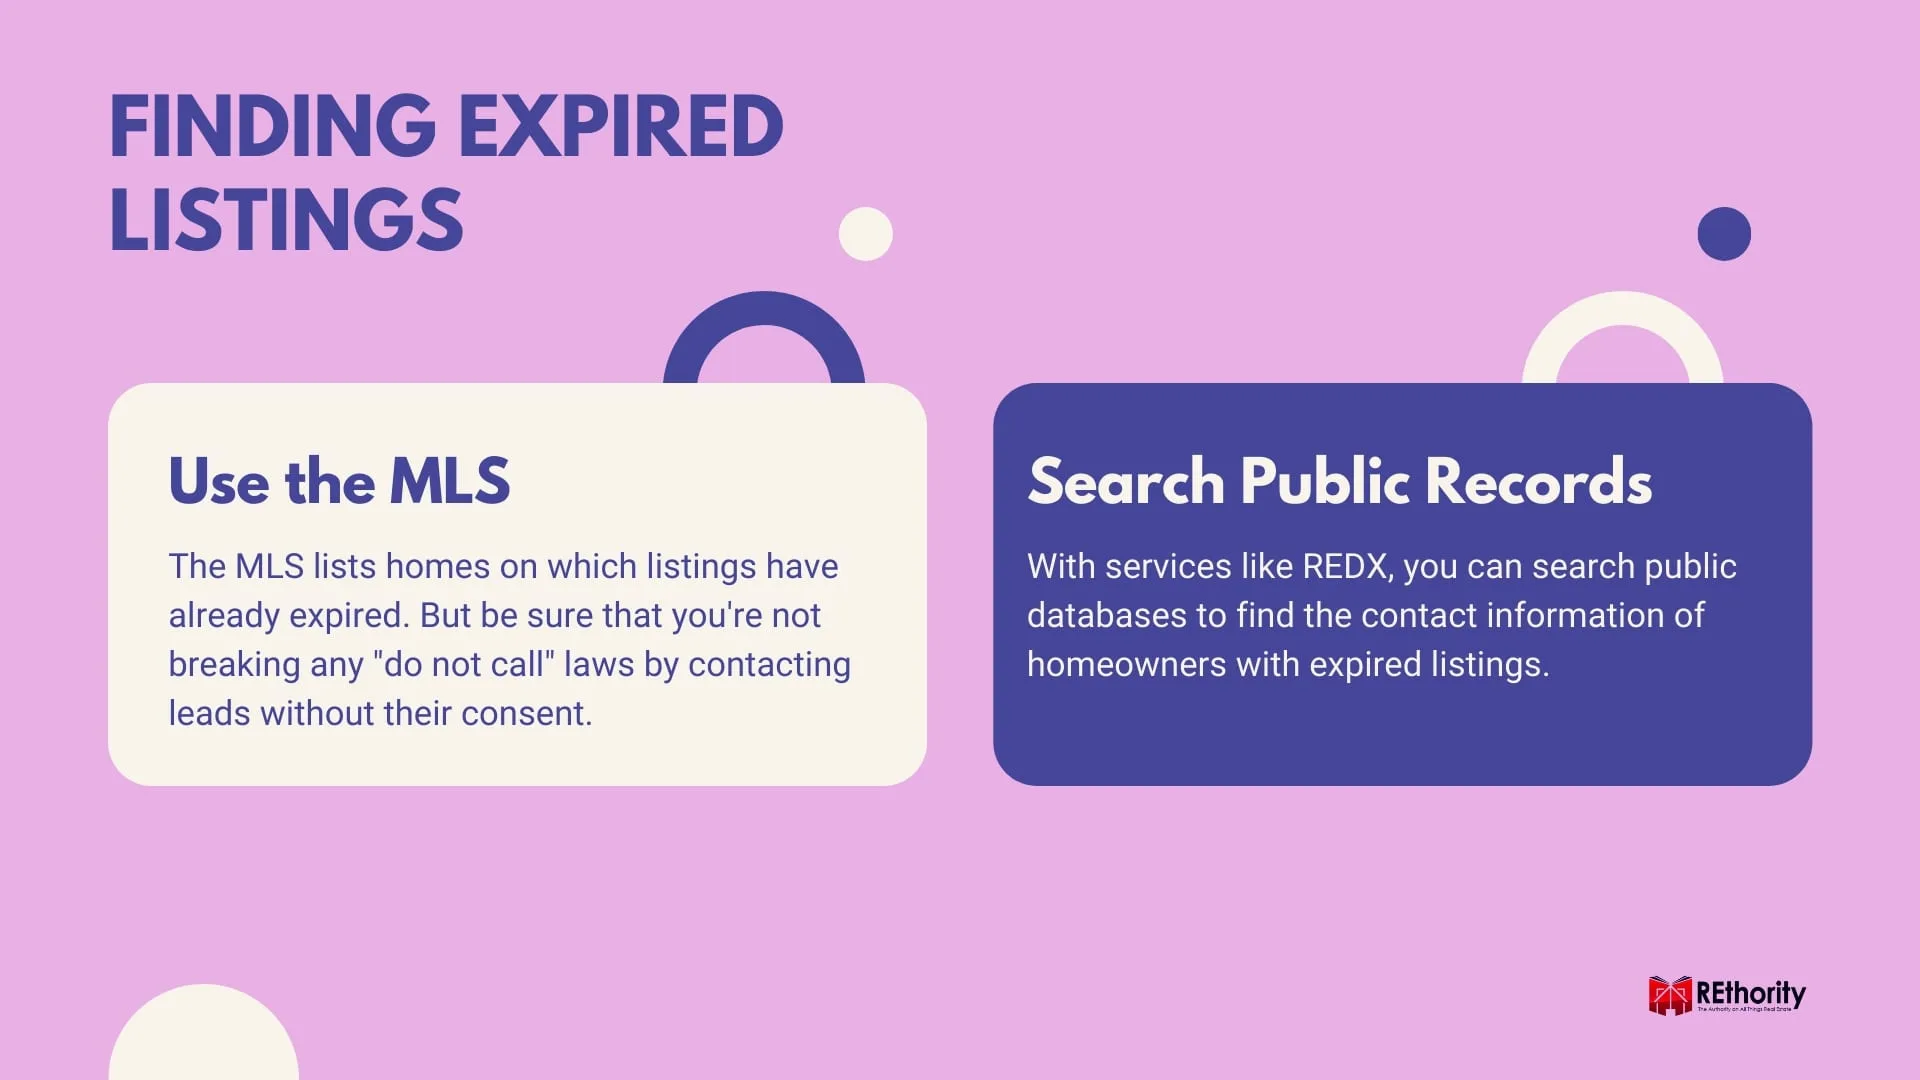 Finding expired listings